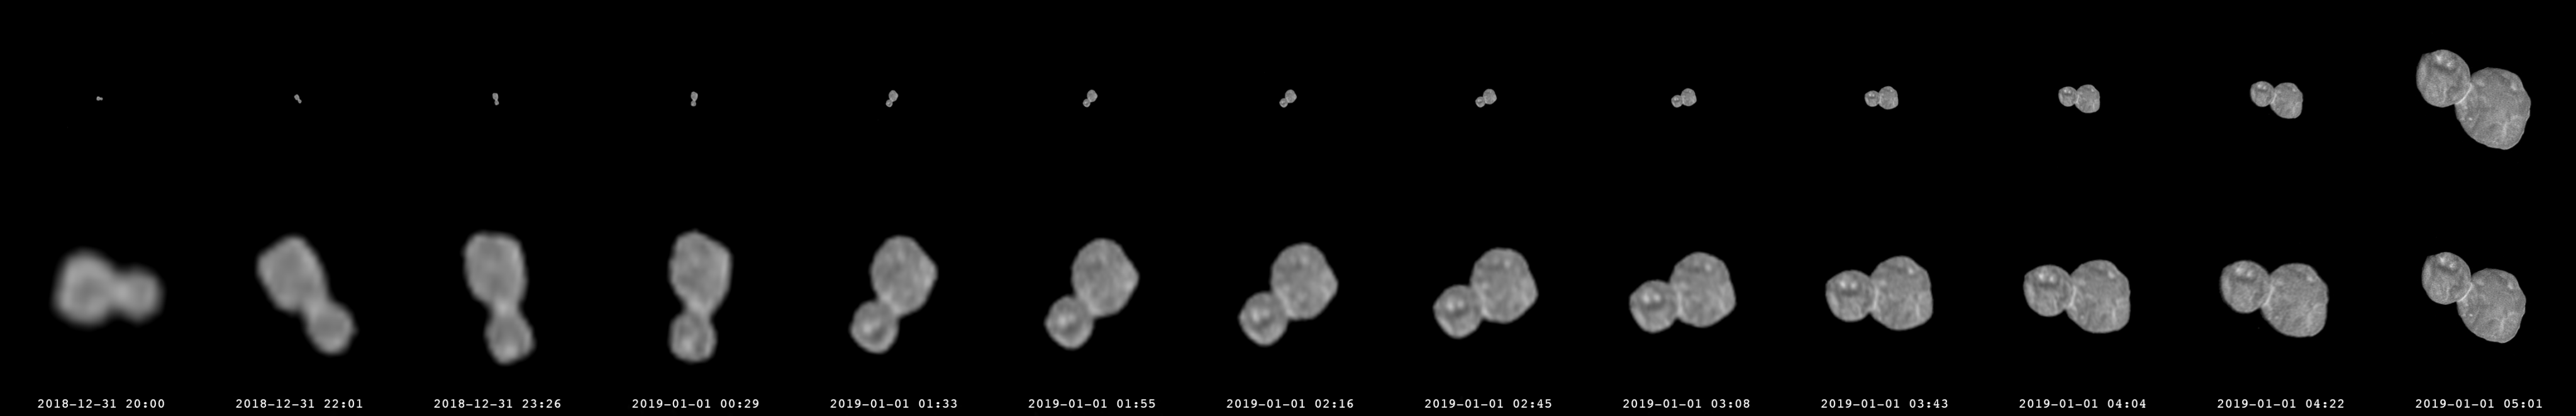 Sequence showing Mu69 growing from dot to fully-resolved object.